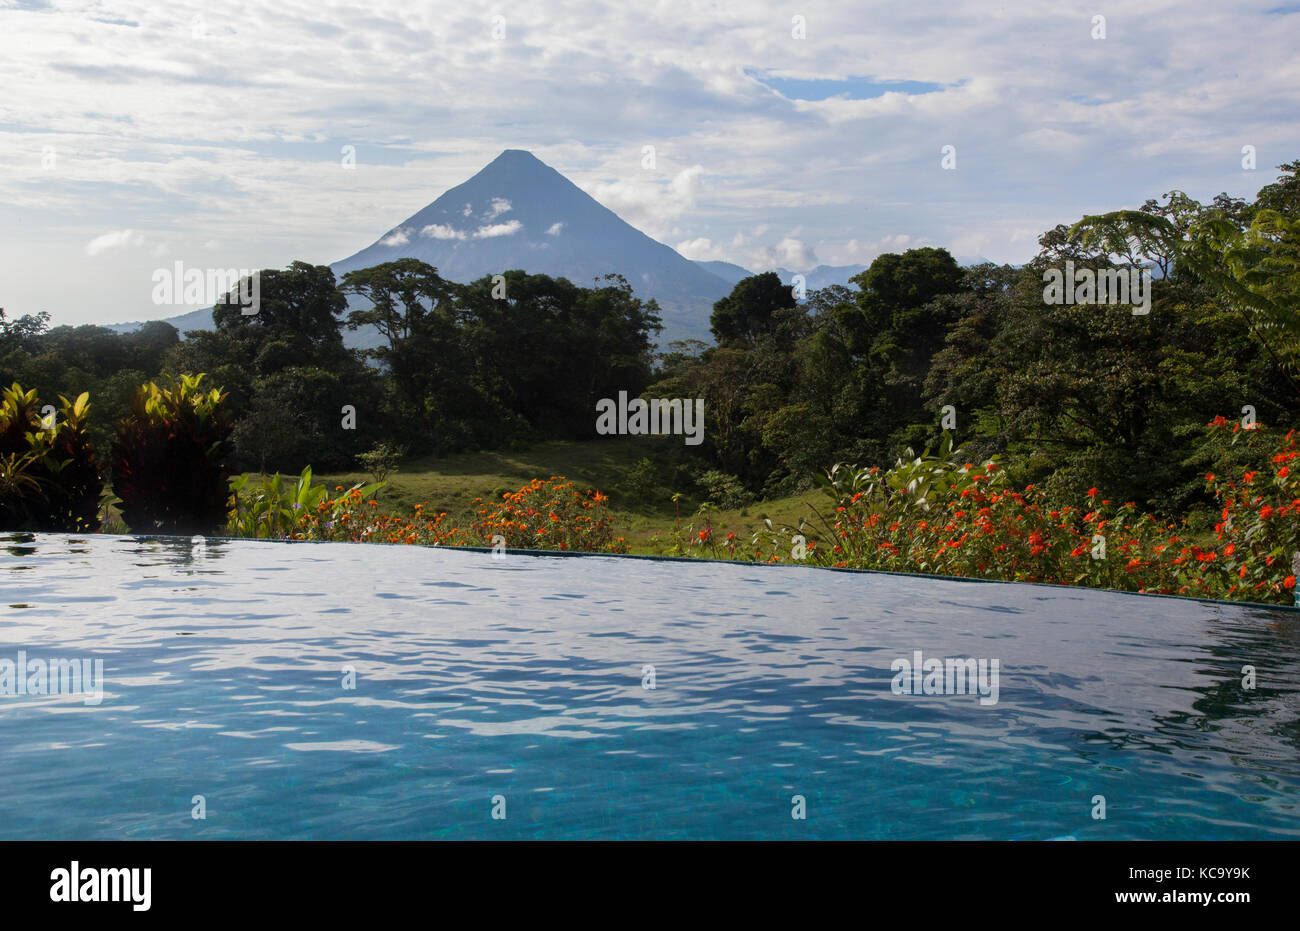 Relax in tropical infinity pool in Arenal Volcano area of Costa Rica Stock Photo